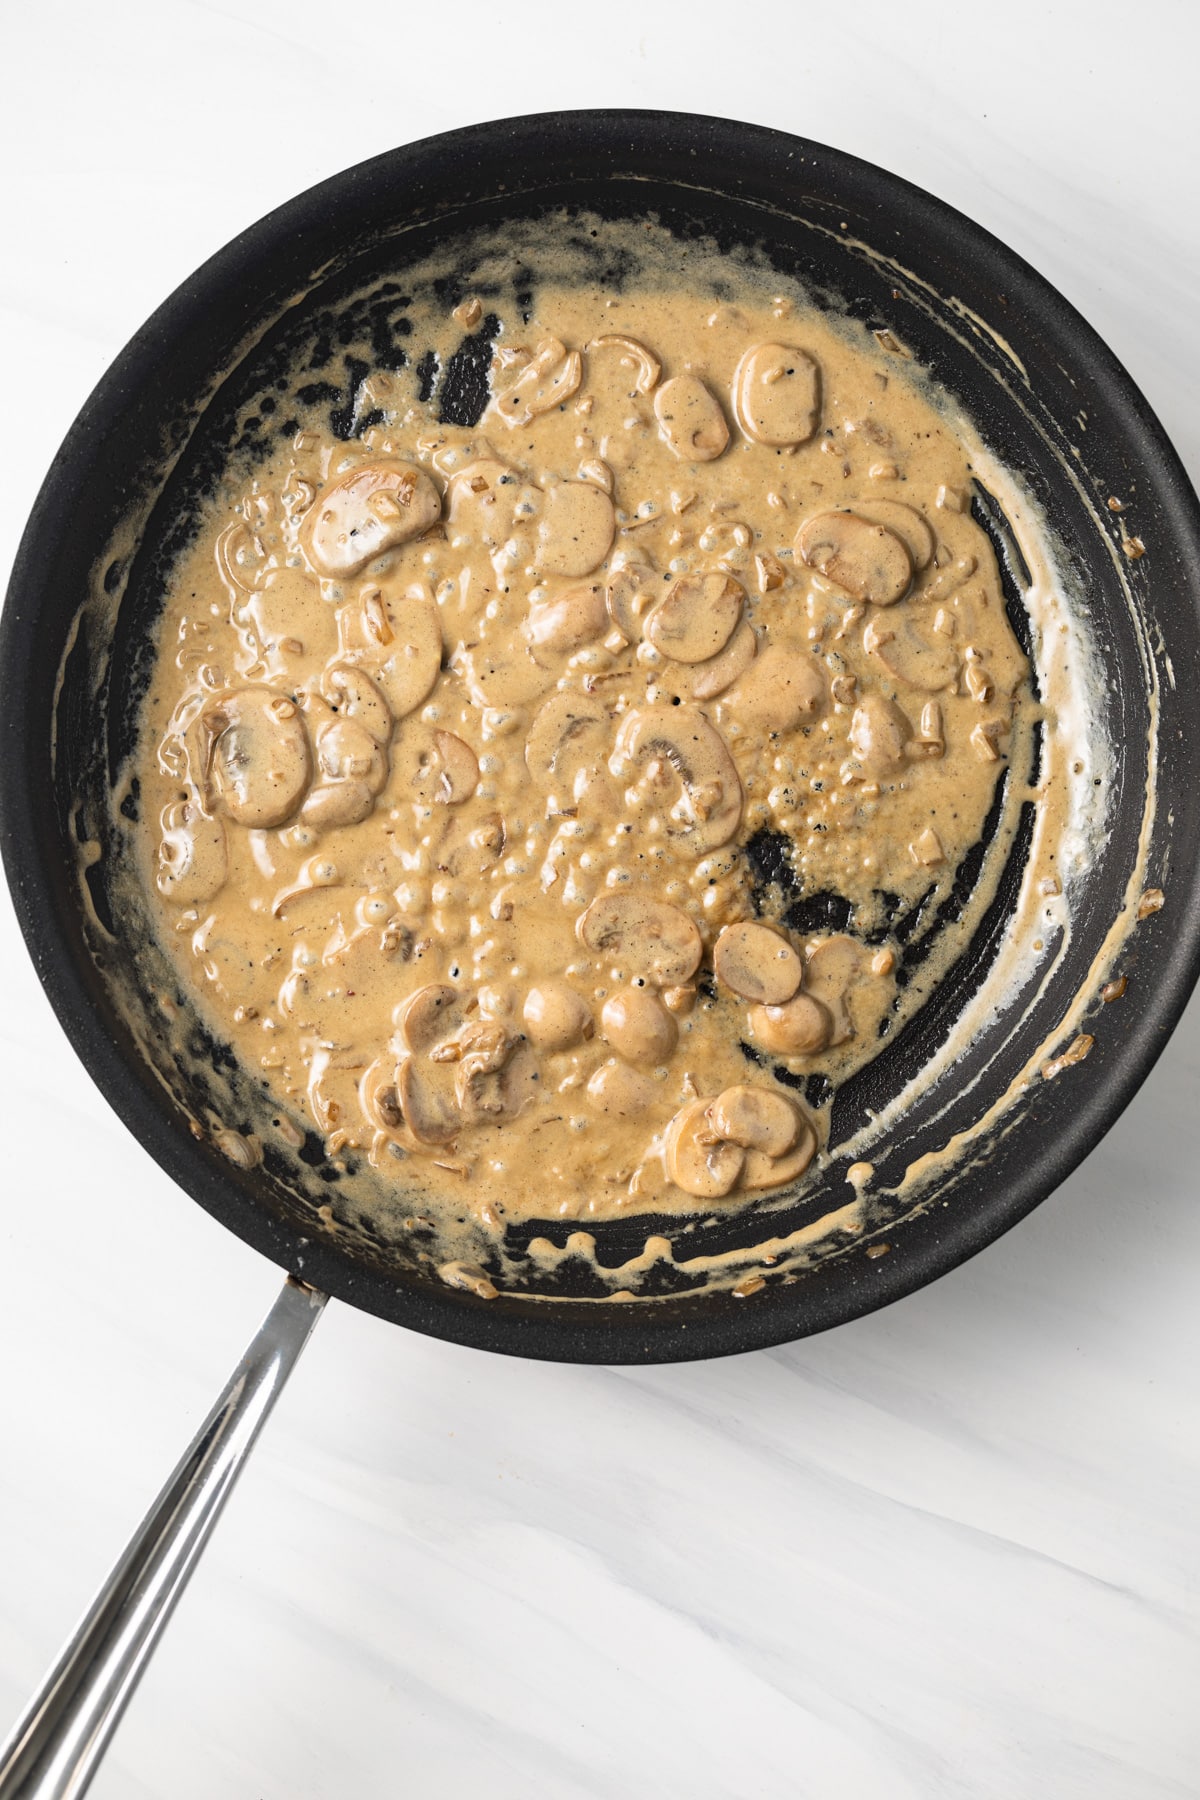 Mushrooms and cream in a skillet.